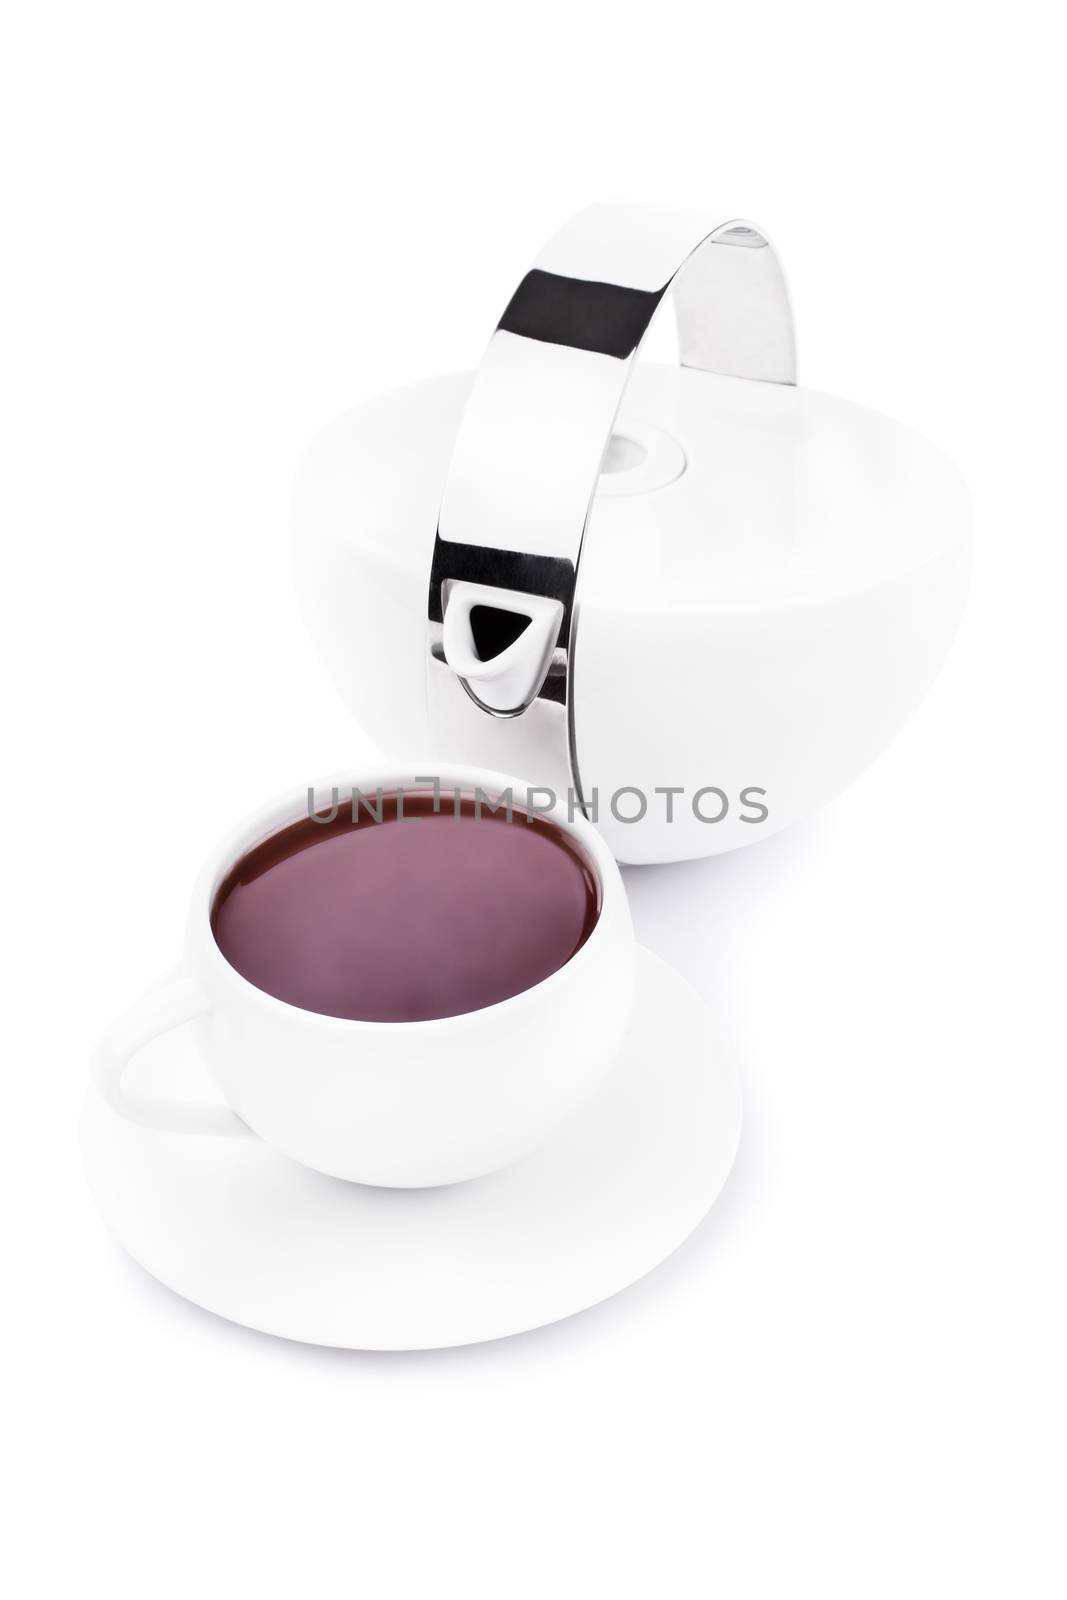 Tea cup filled with red colored tea and tea pot, isolated on white background.